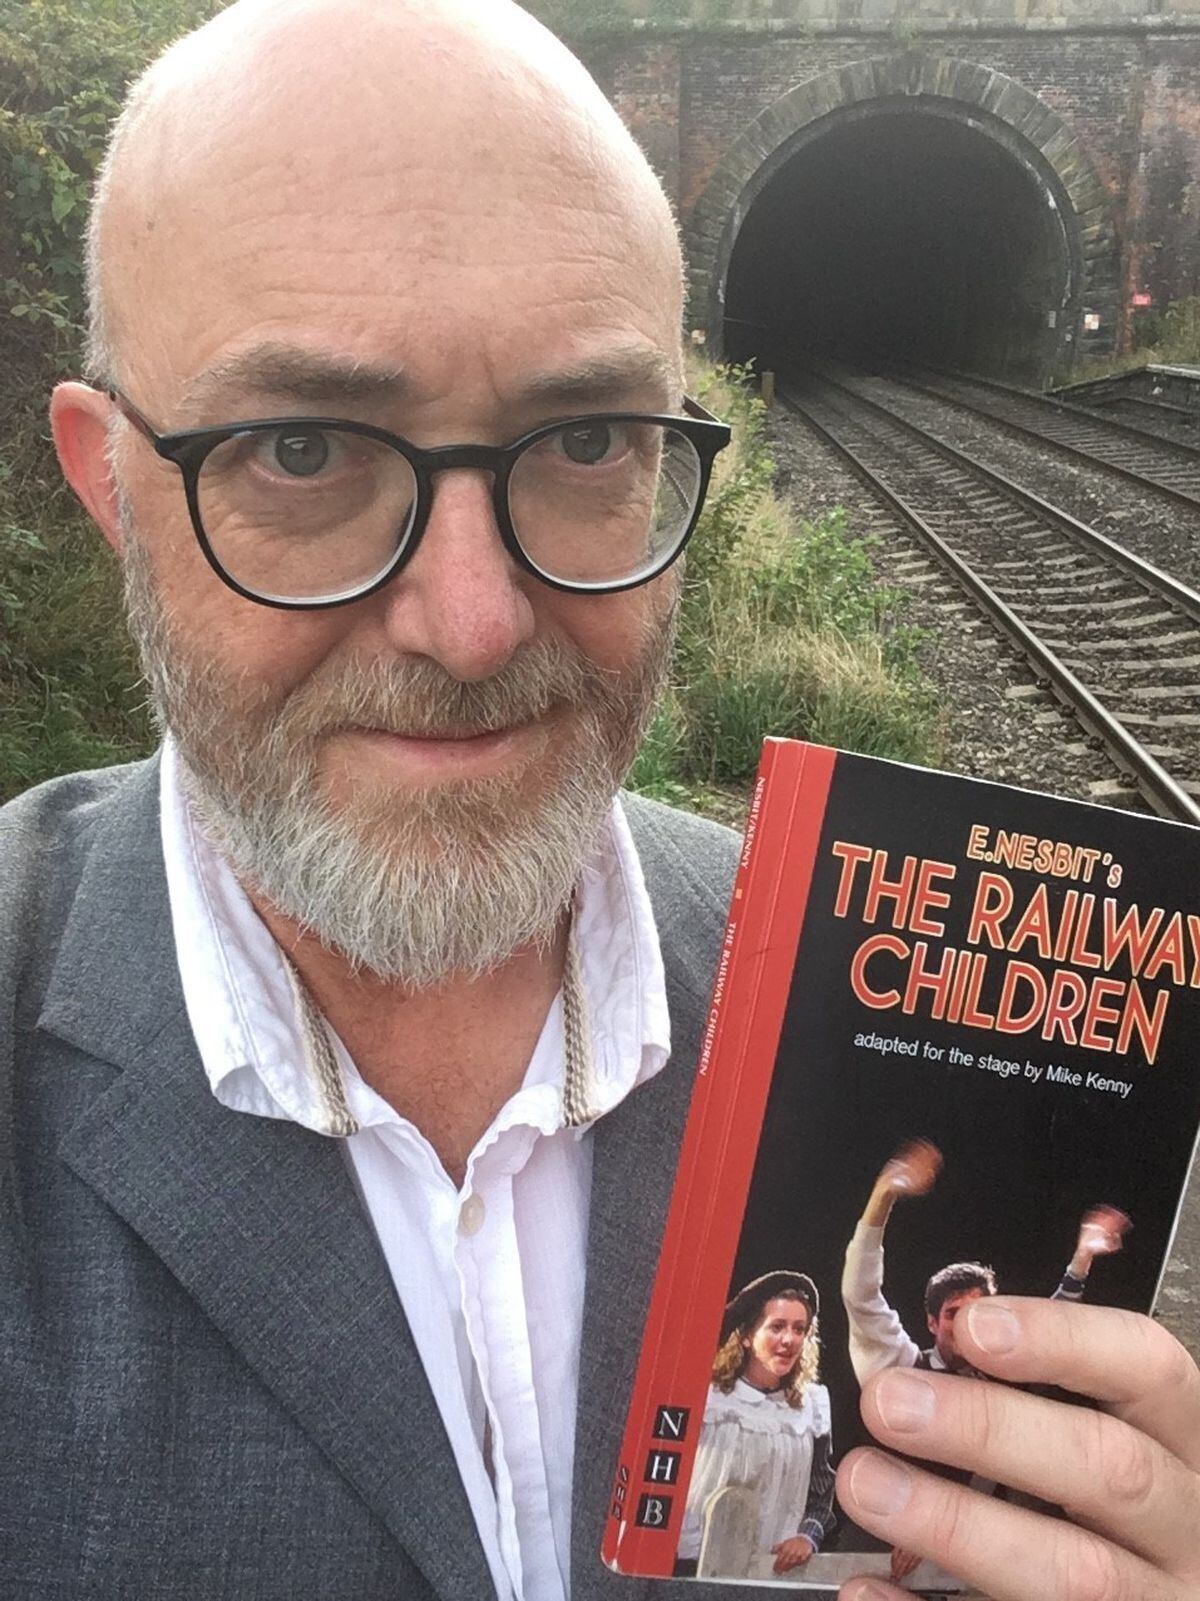 Peter Hayter, director of The Railway Children, complete with script and tunnel